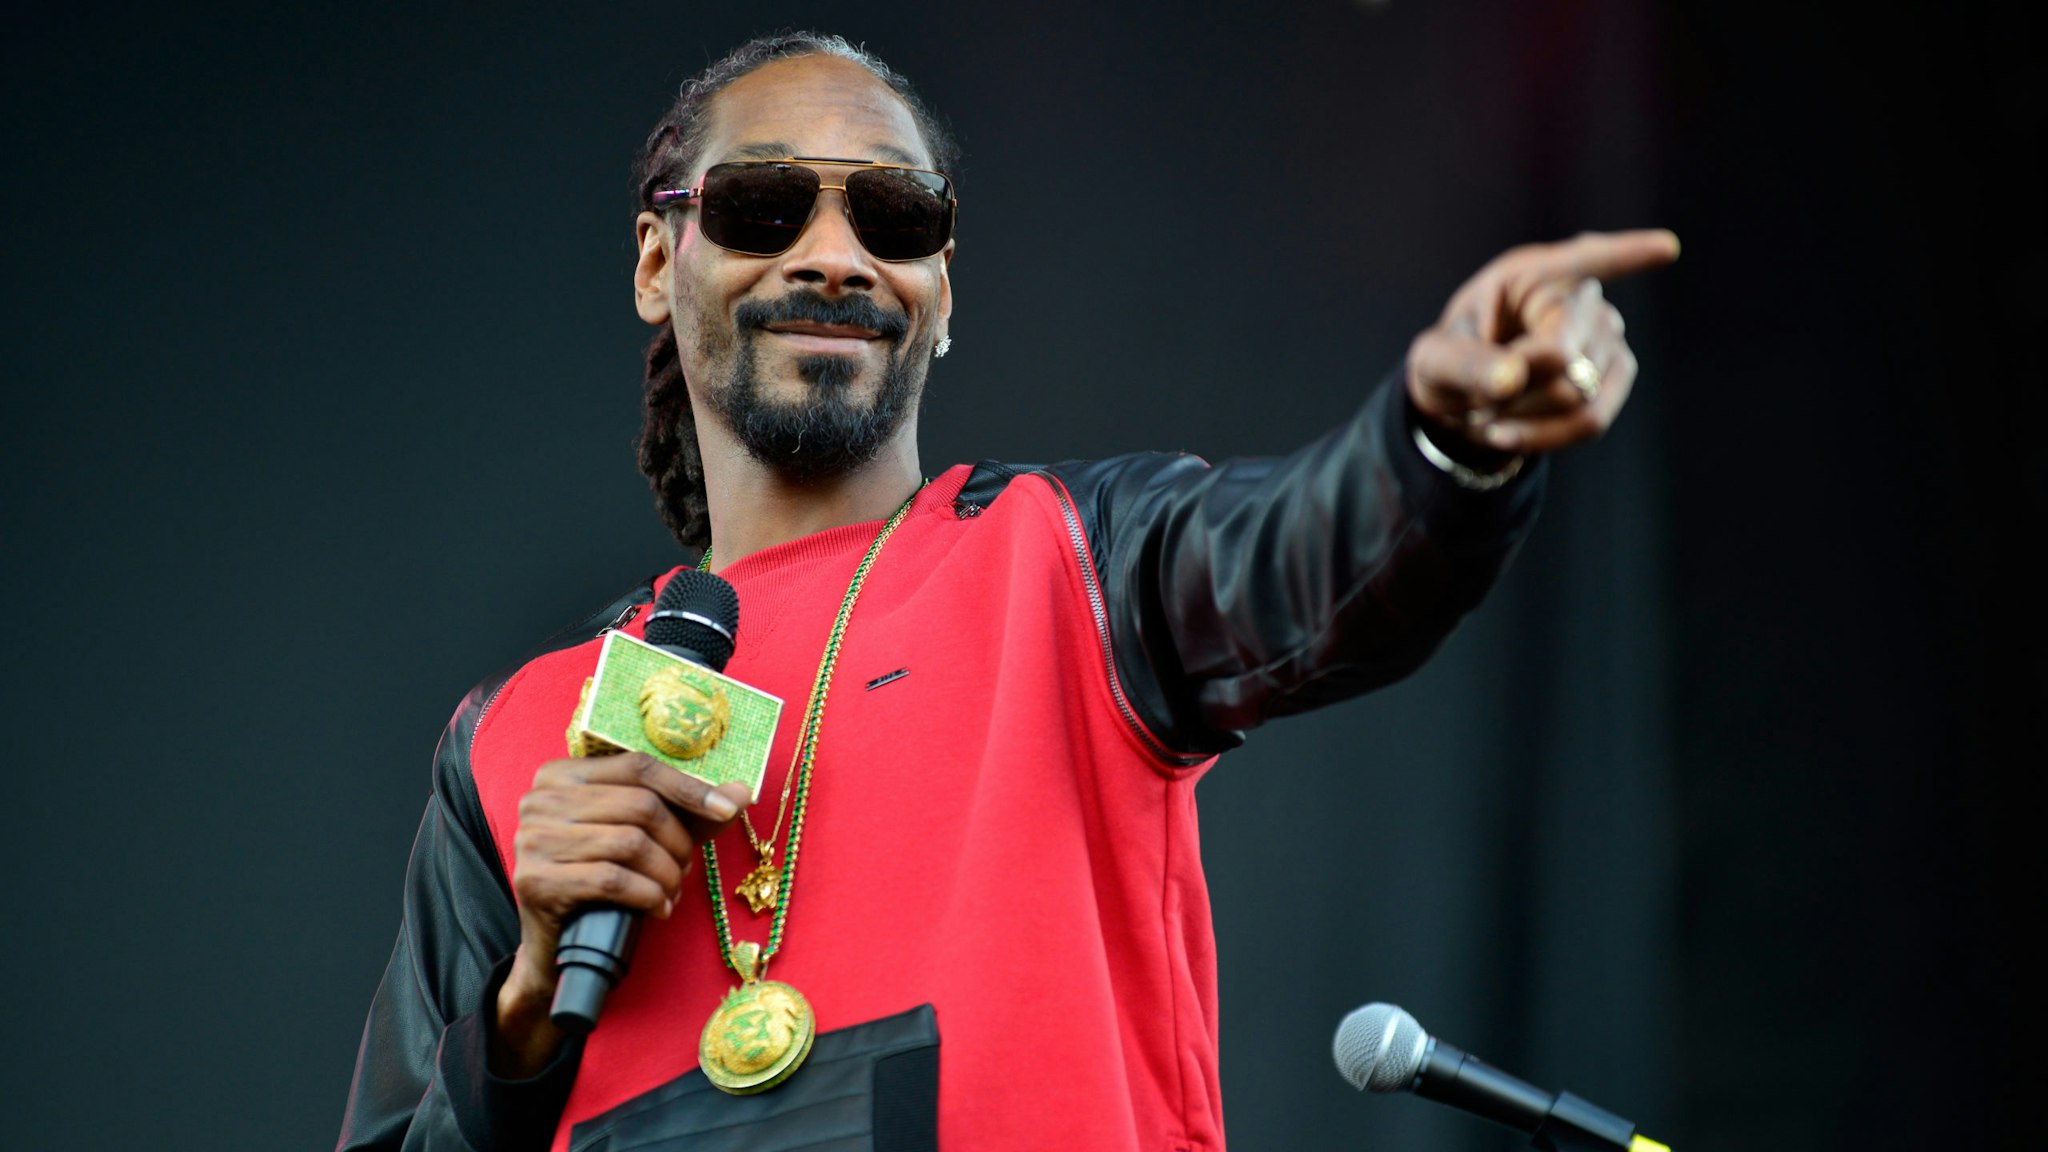 AUSTIN, TX - MARCH 15: Snoop Dogg performs onstage at the SXSW Outdoor Stage at Butler Park during the 2014 SXSW Music, Film + Interactive Festival at Butler Park on March 15, 2014 in Austin, Texas.